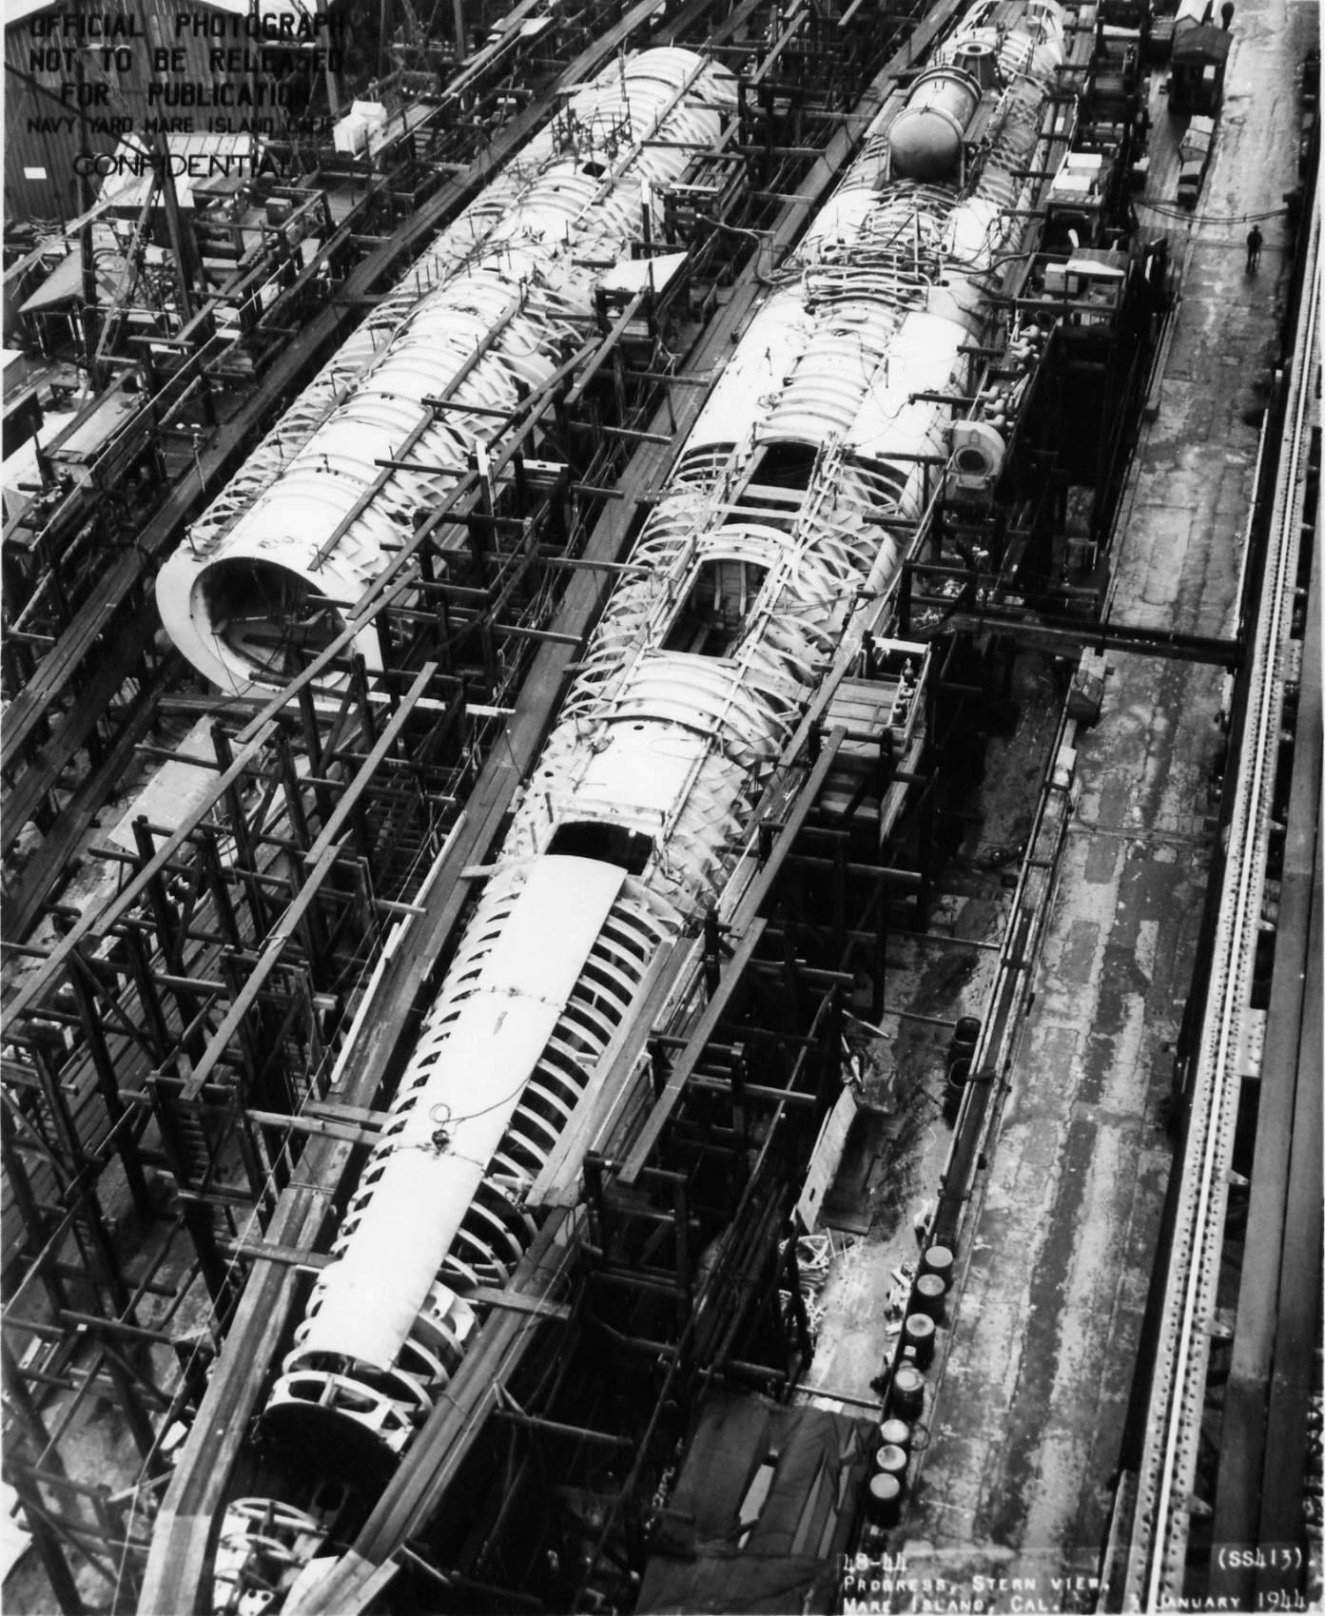 Submarines Springer (less complete) and Spot under construction, Mare Island Naval Shipyard, Vallejo, California, United States, 3 Jan 1944, photo 3 of 4